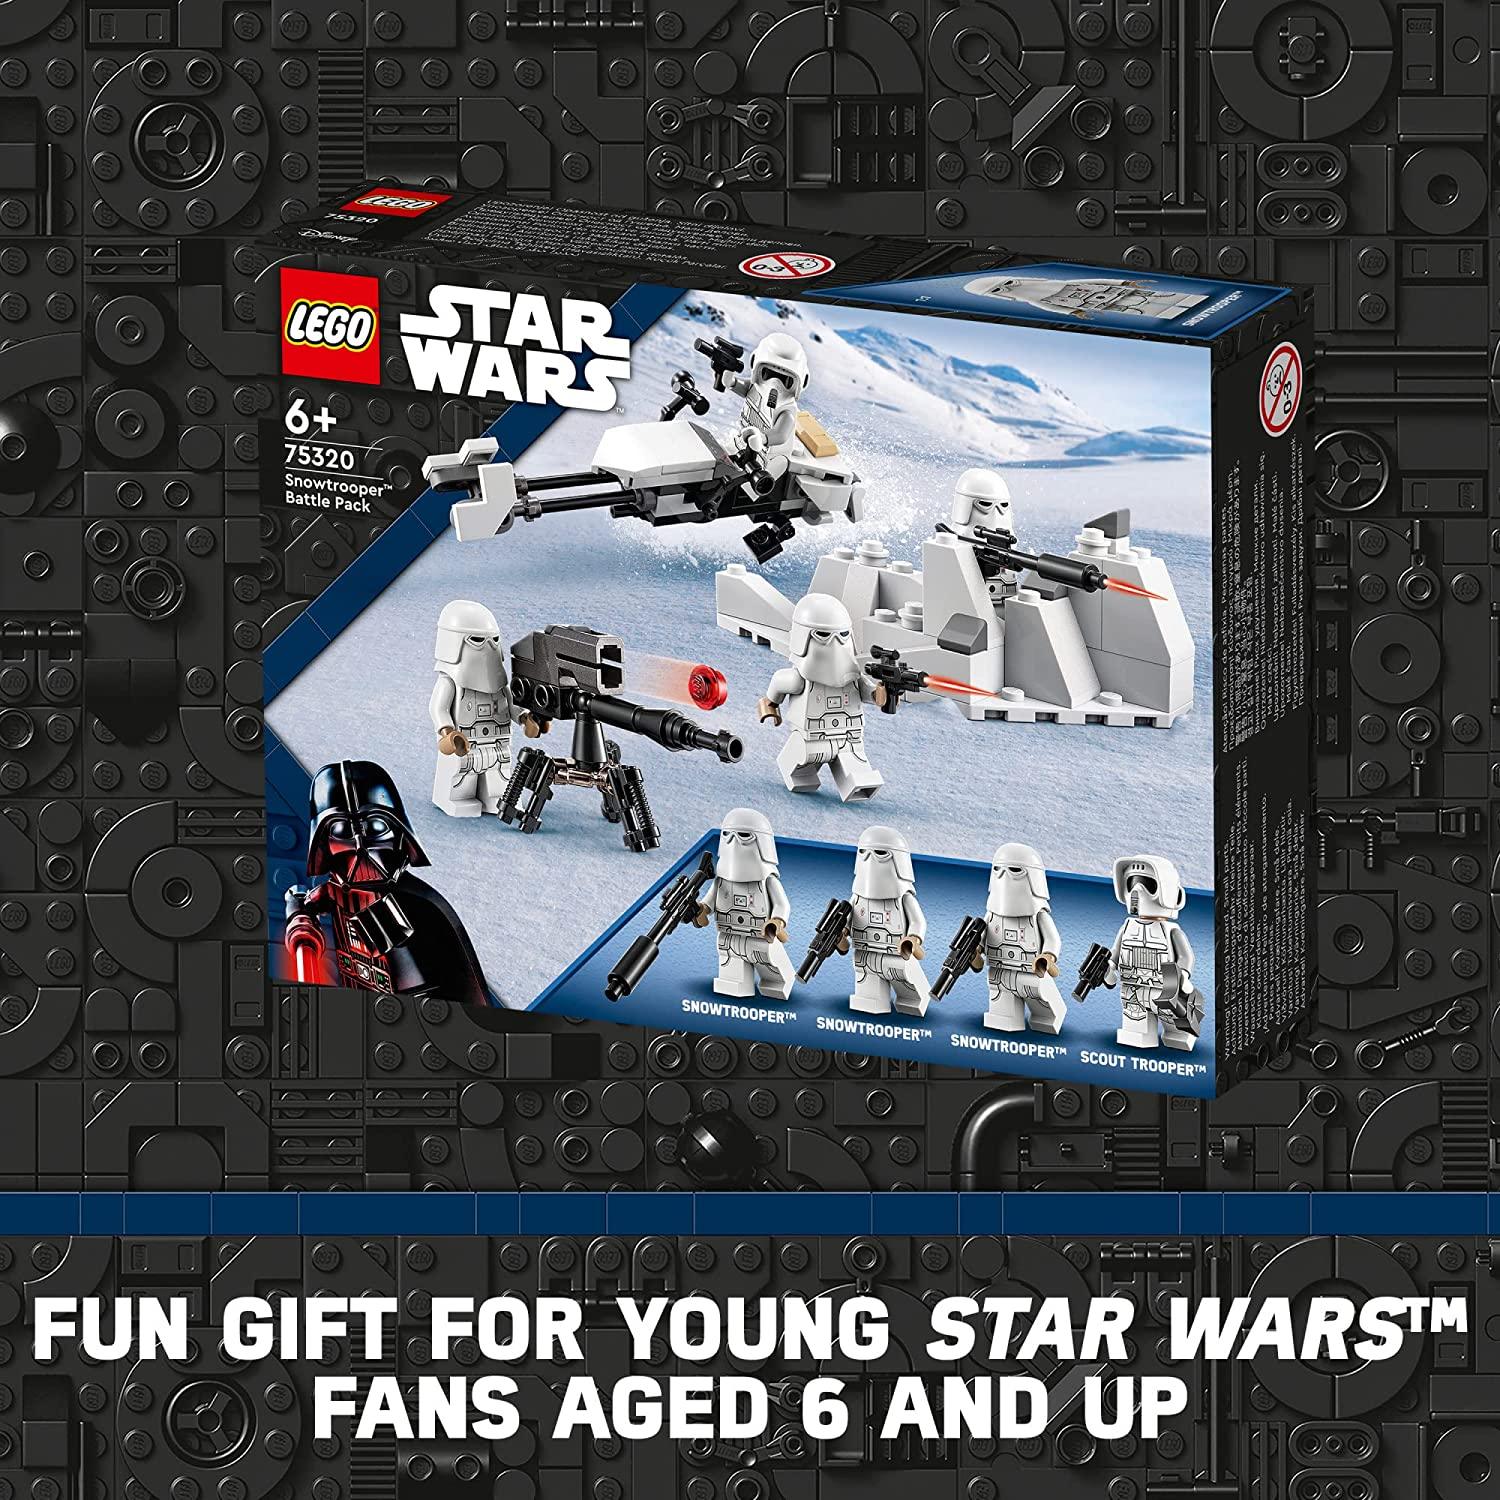 LEGO Star Wars Snowtrooper Battle Pack 75320 Toy Building Kit (105 Pieces) - BumbleToys - 5-7 Years, 6+ Years, Boys, LEGO, OXE, Pre-Order, star wars